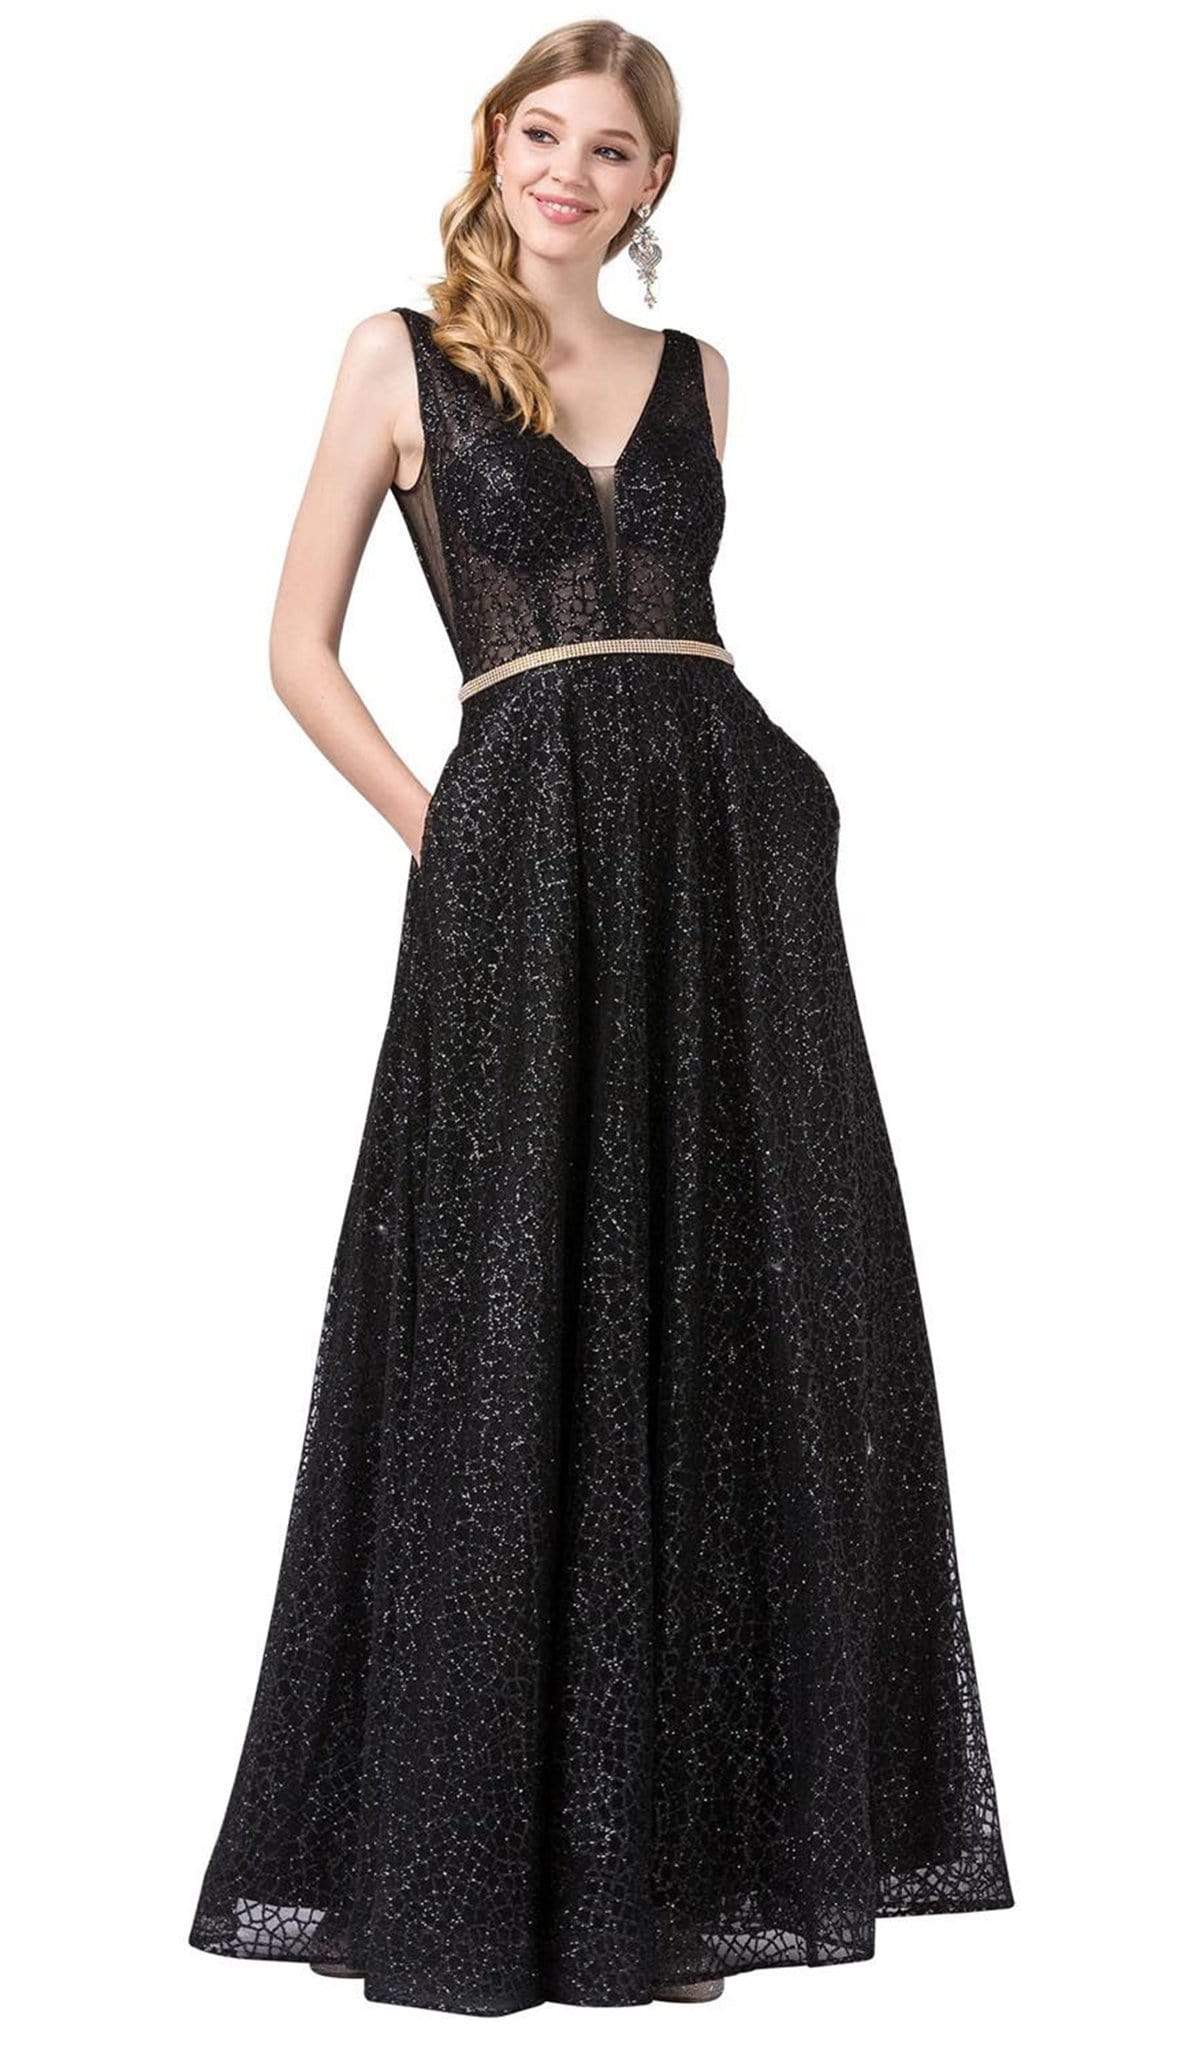 Image of Dancing Queen - 2593 Illusion Plunging V Neck Glitter Mesh Prom Dress